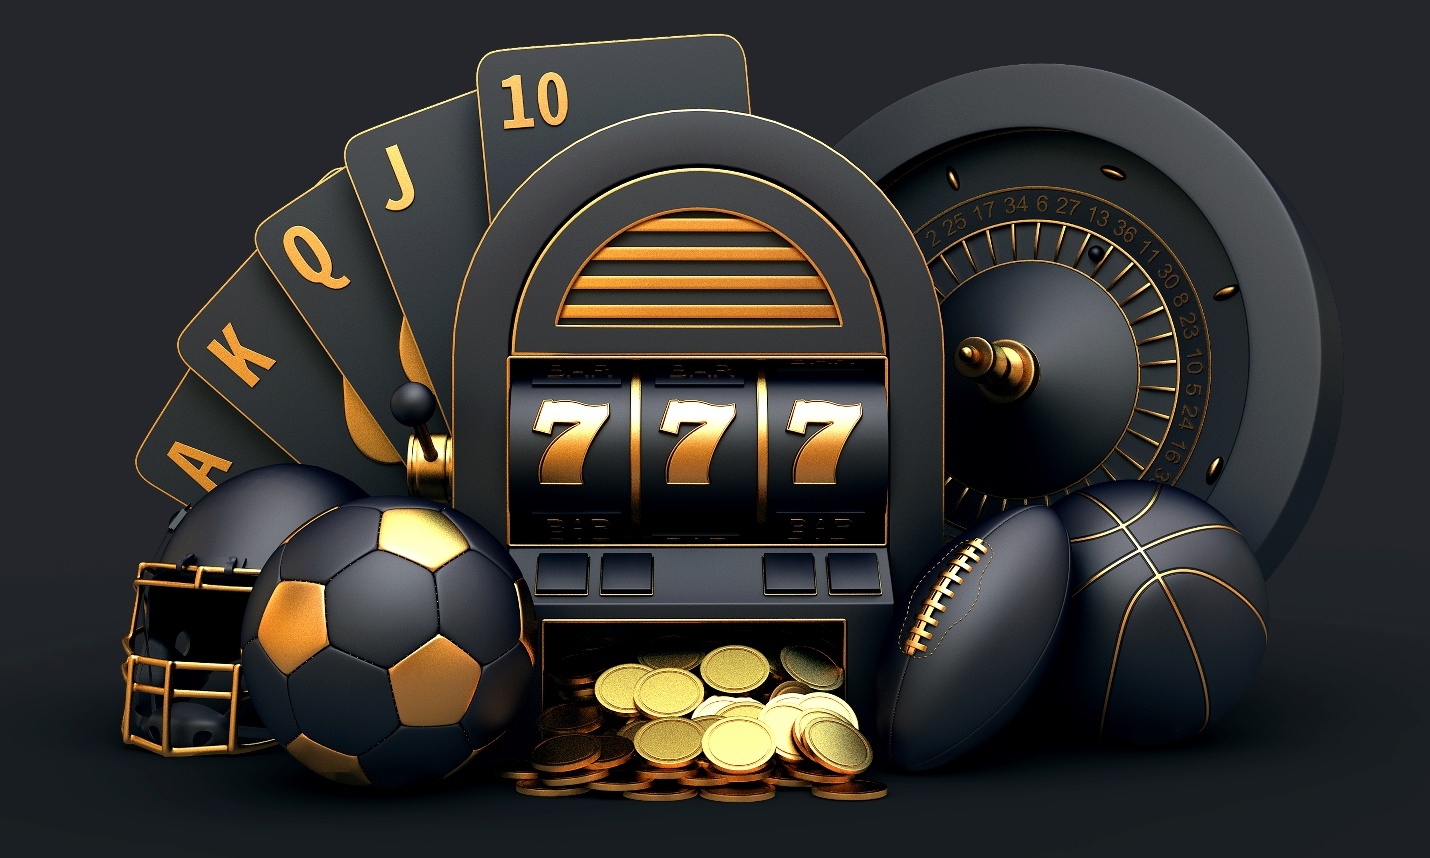  Online sports and casino gambling